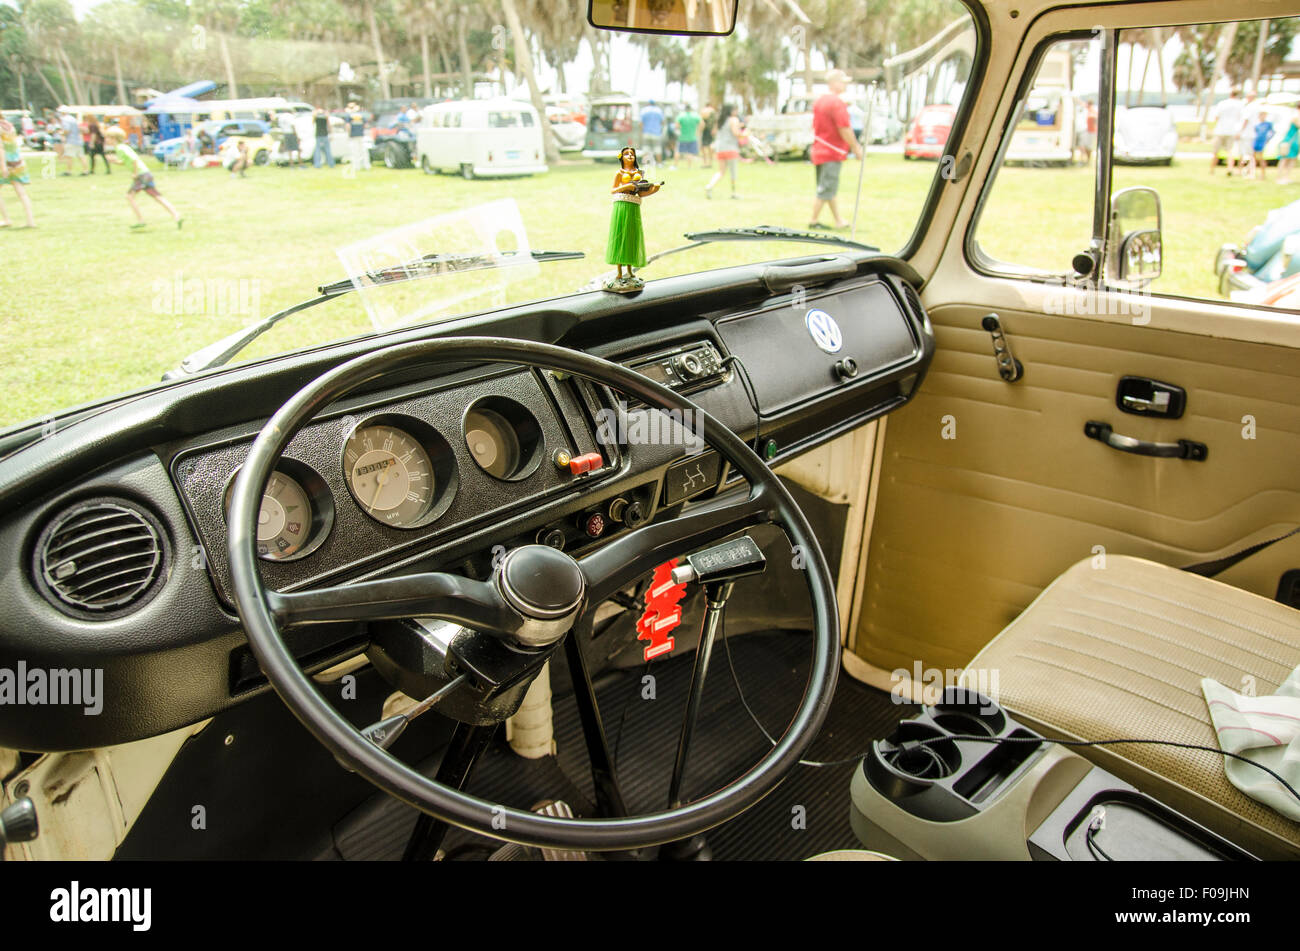 Interior of Volkswagens at VW's over the Skyway car show. Stock Photo